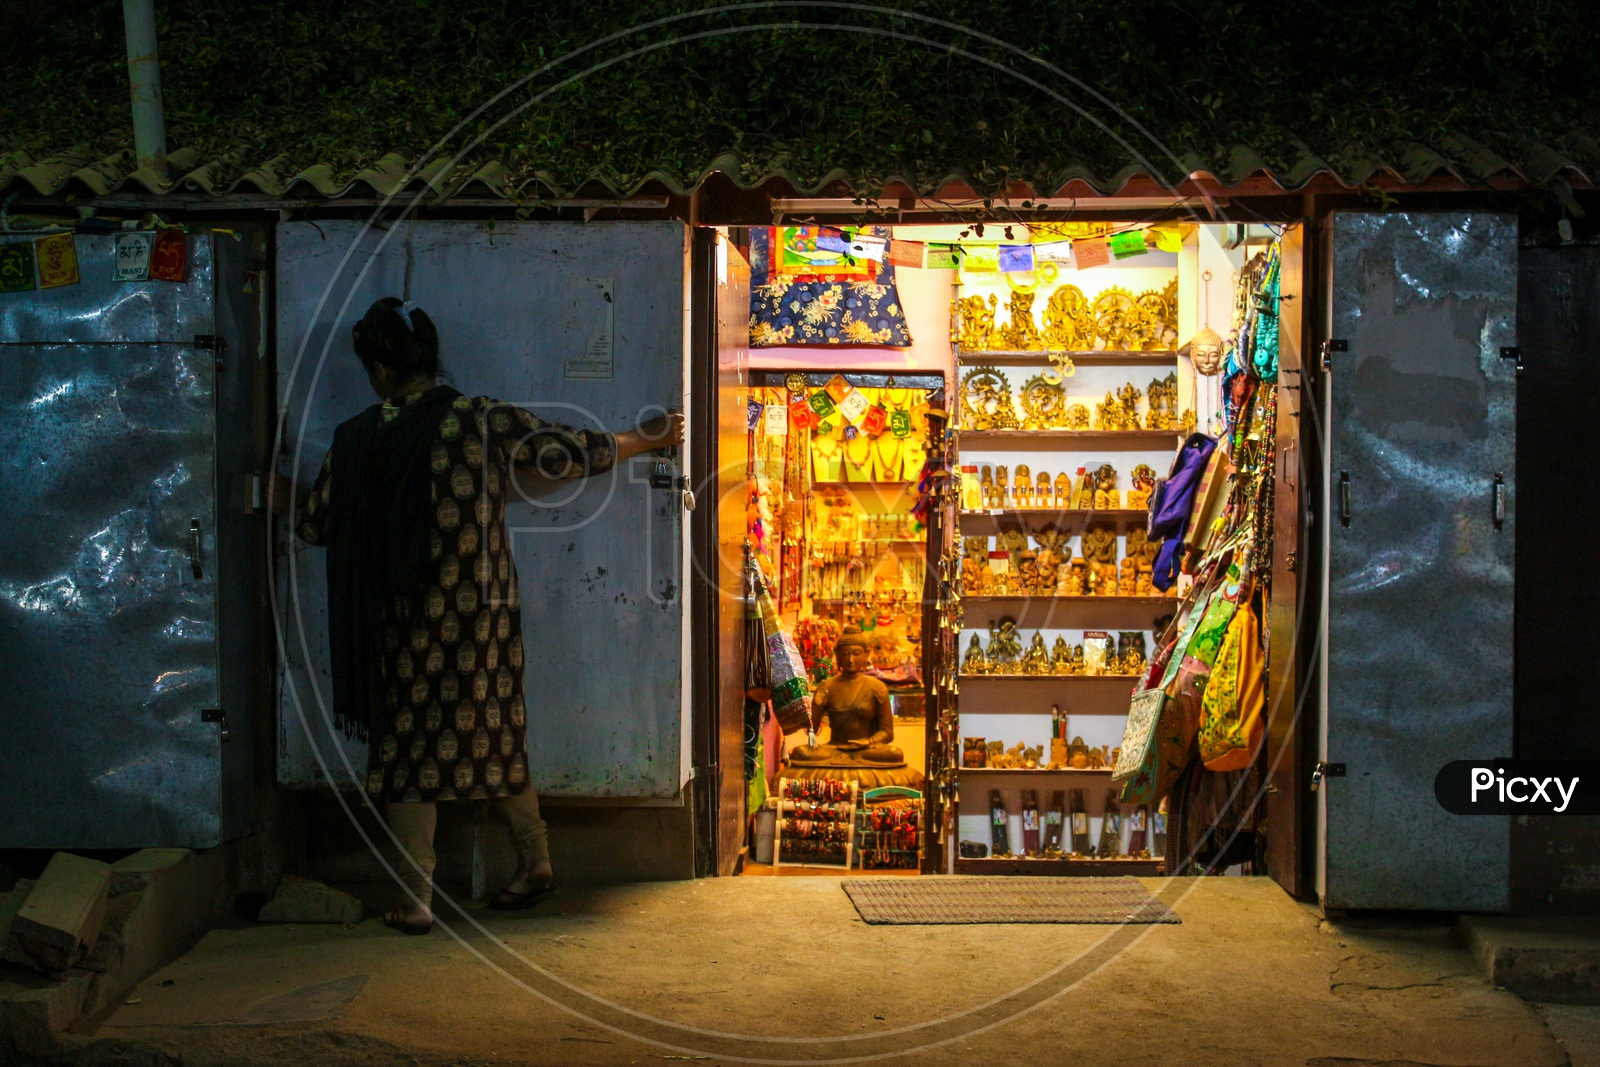 Shopkeeper closing the shop in the streets of Hampi during night